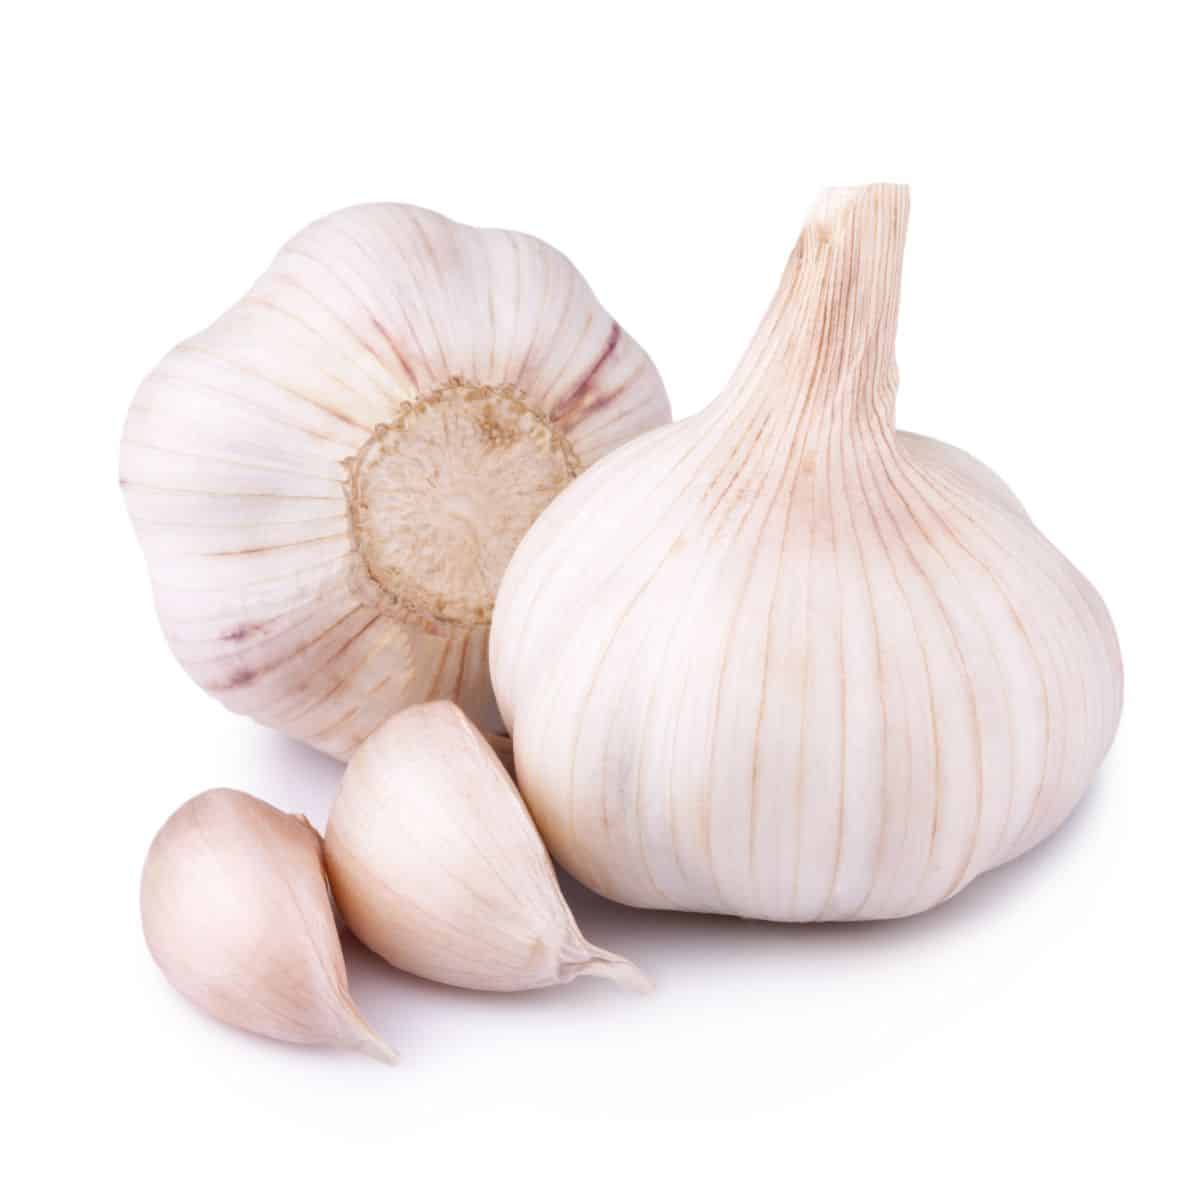 Californian early garlic on an isolated white background.